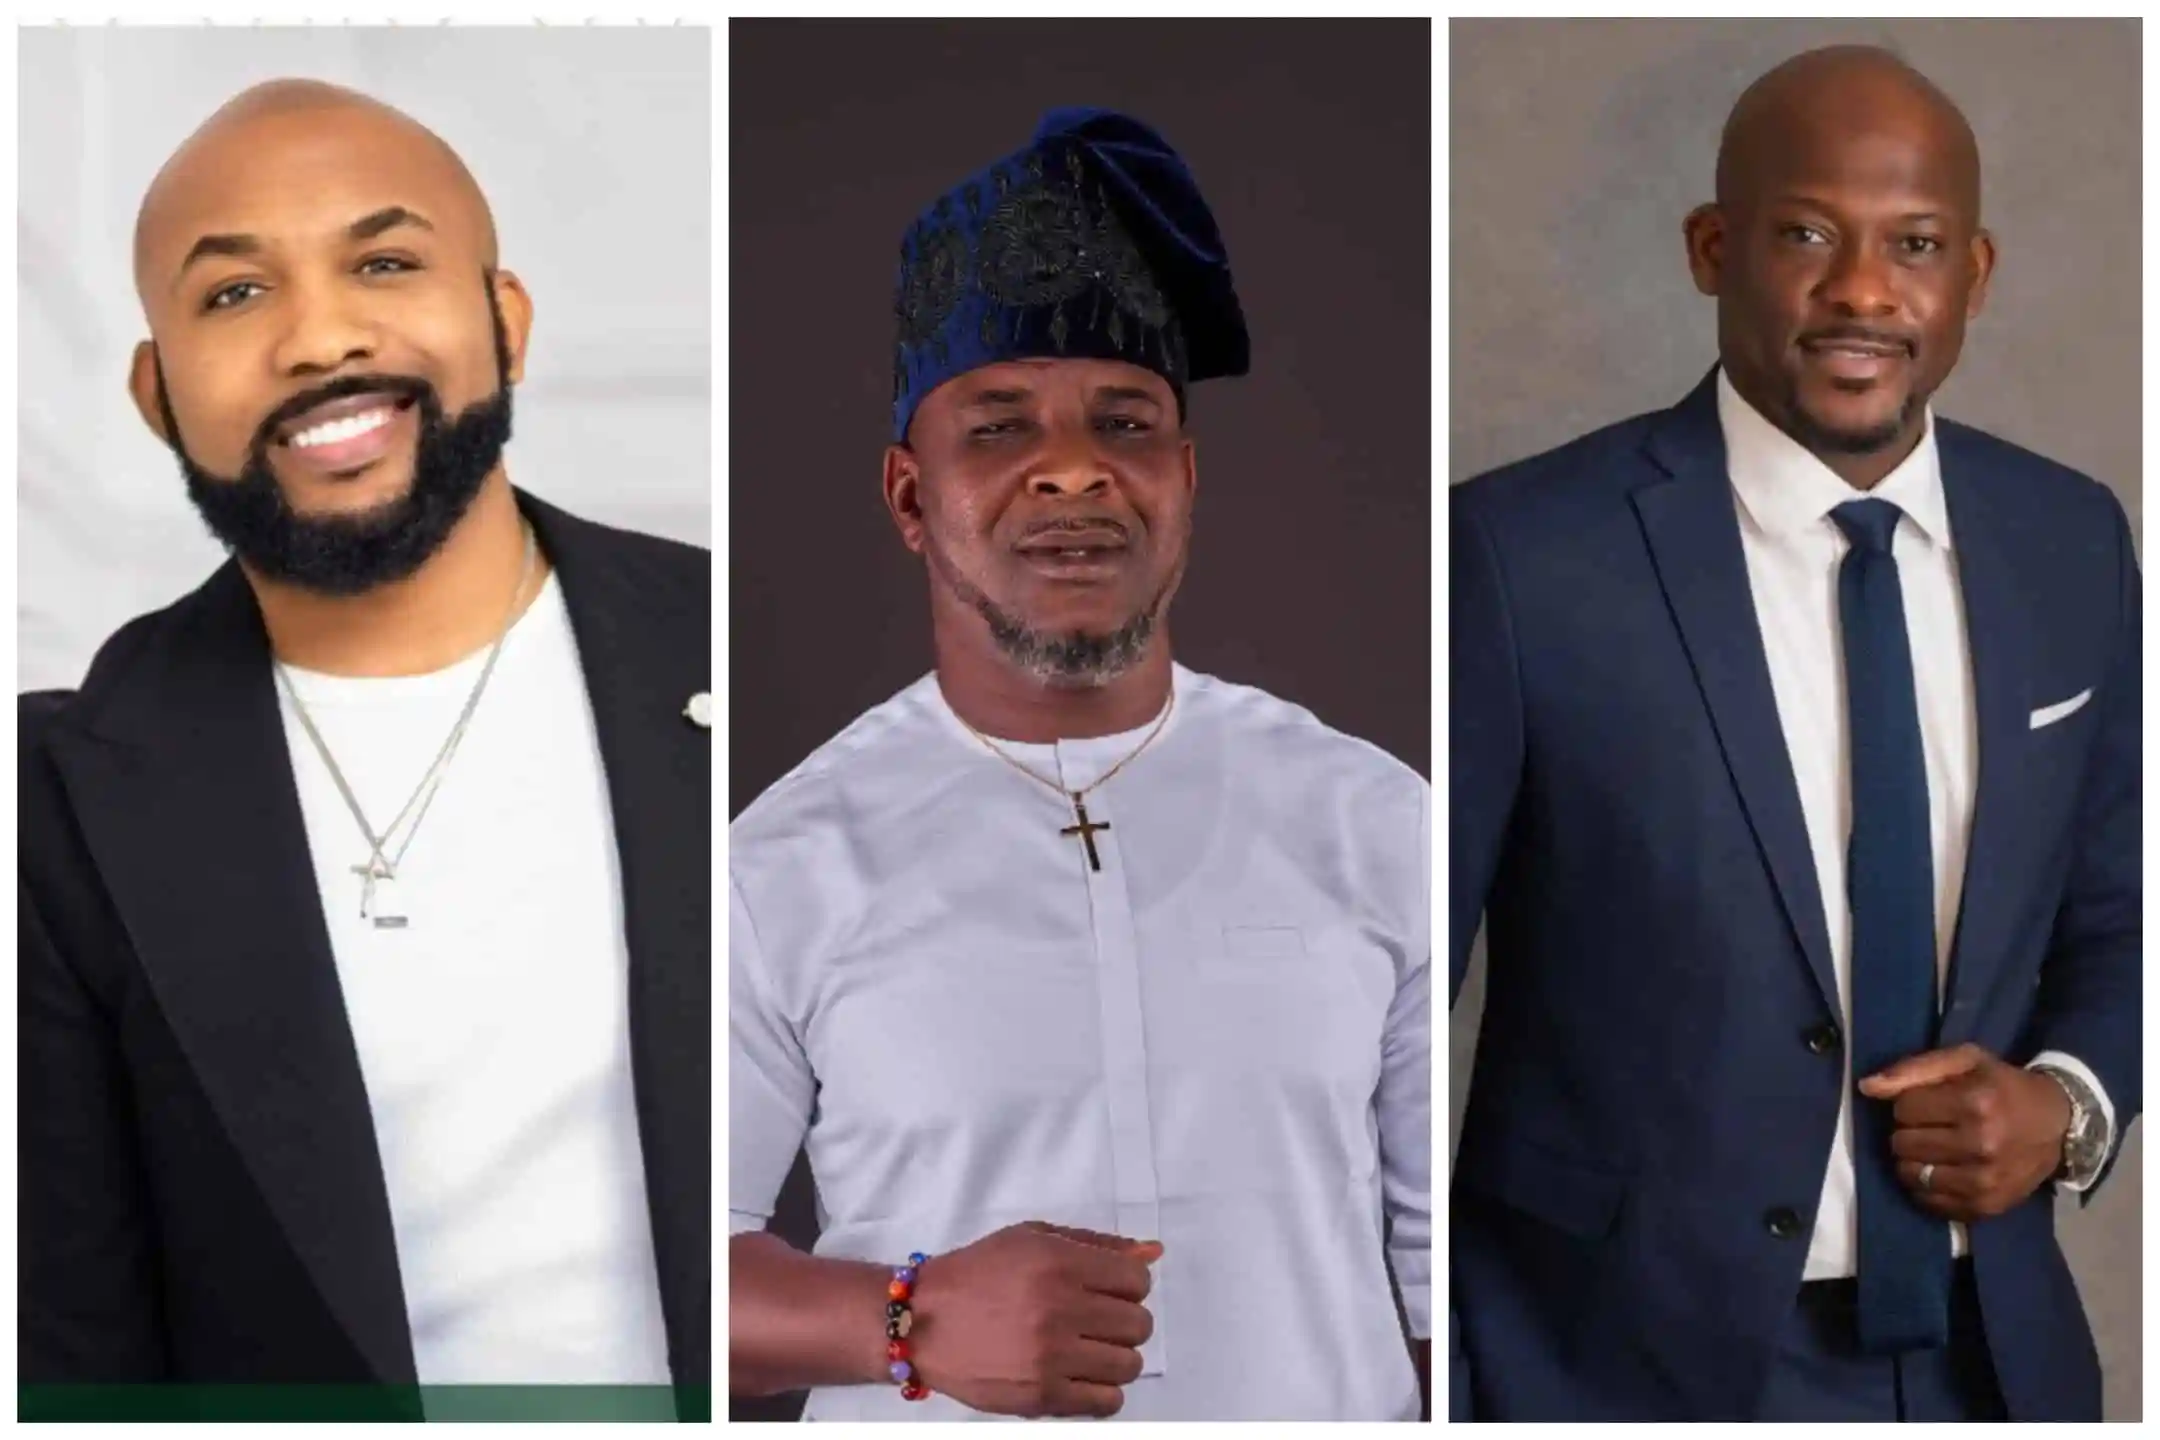 Tribunal orders election rerun in Banky W’s federal constituency